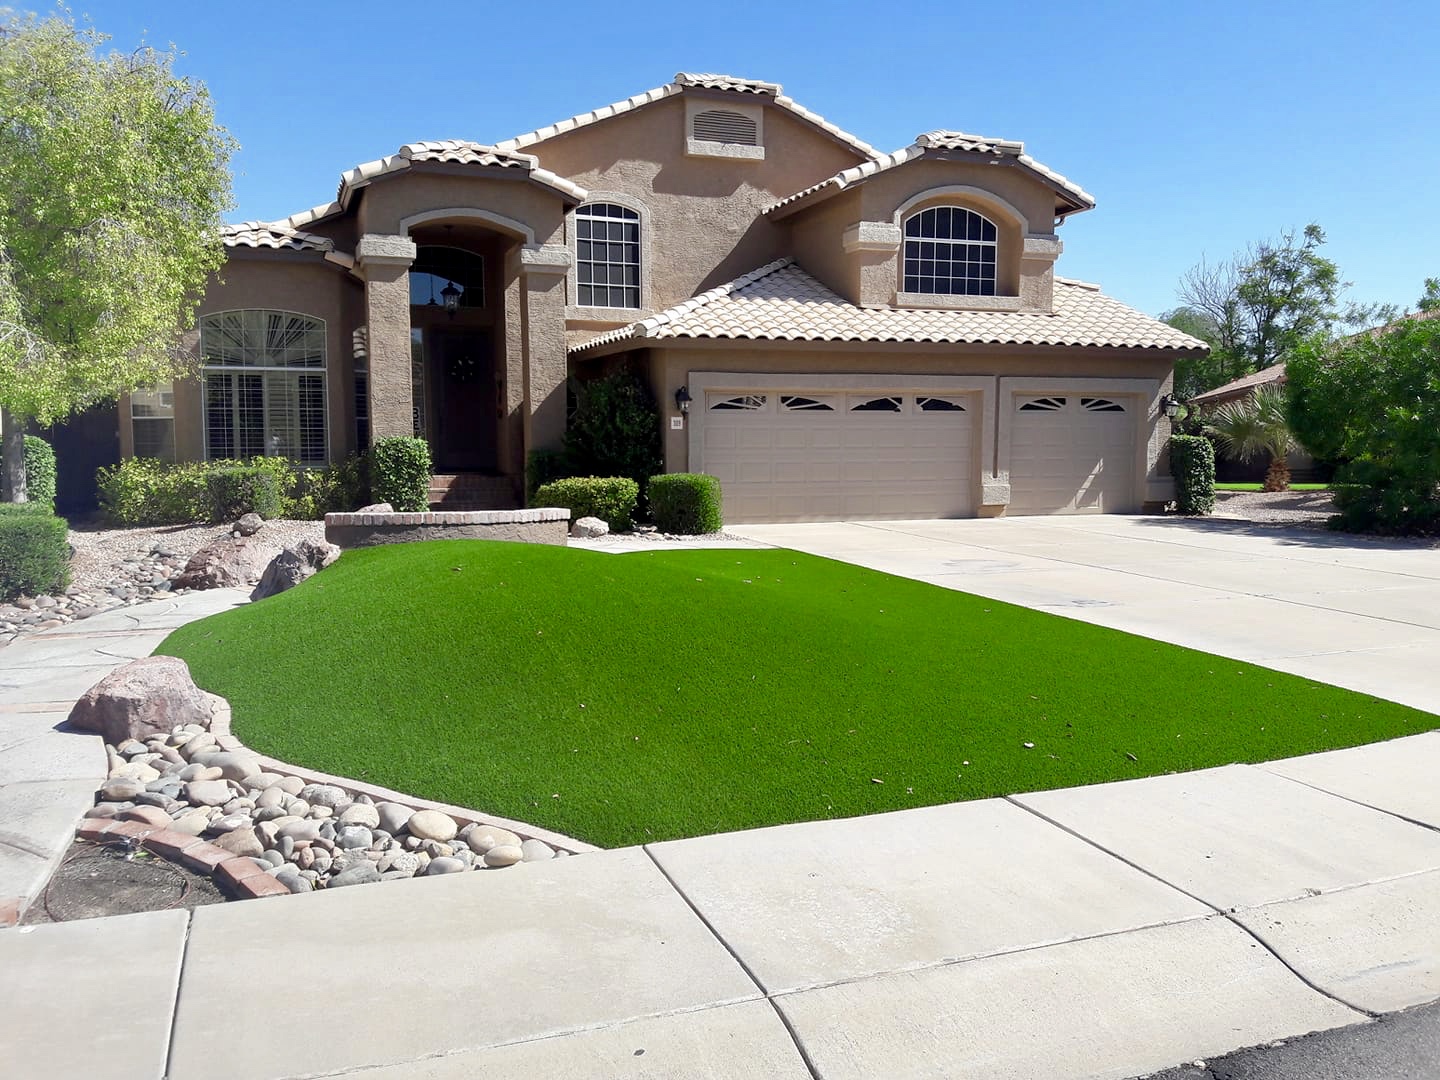 statement front yard with artificial turf fake grass for no watering and low maintenance curb appeal